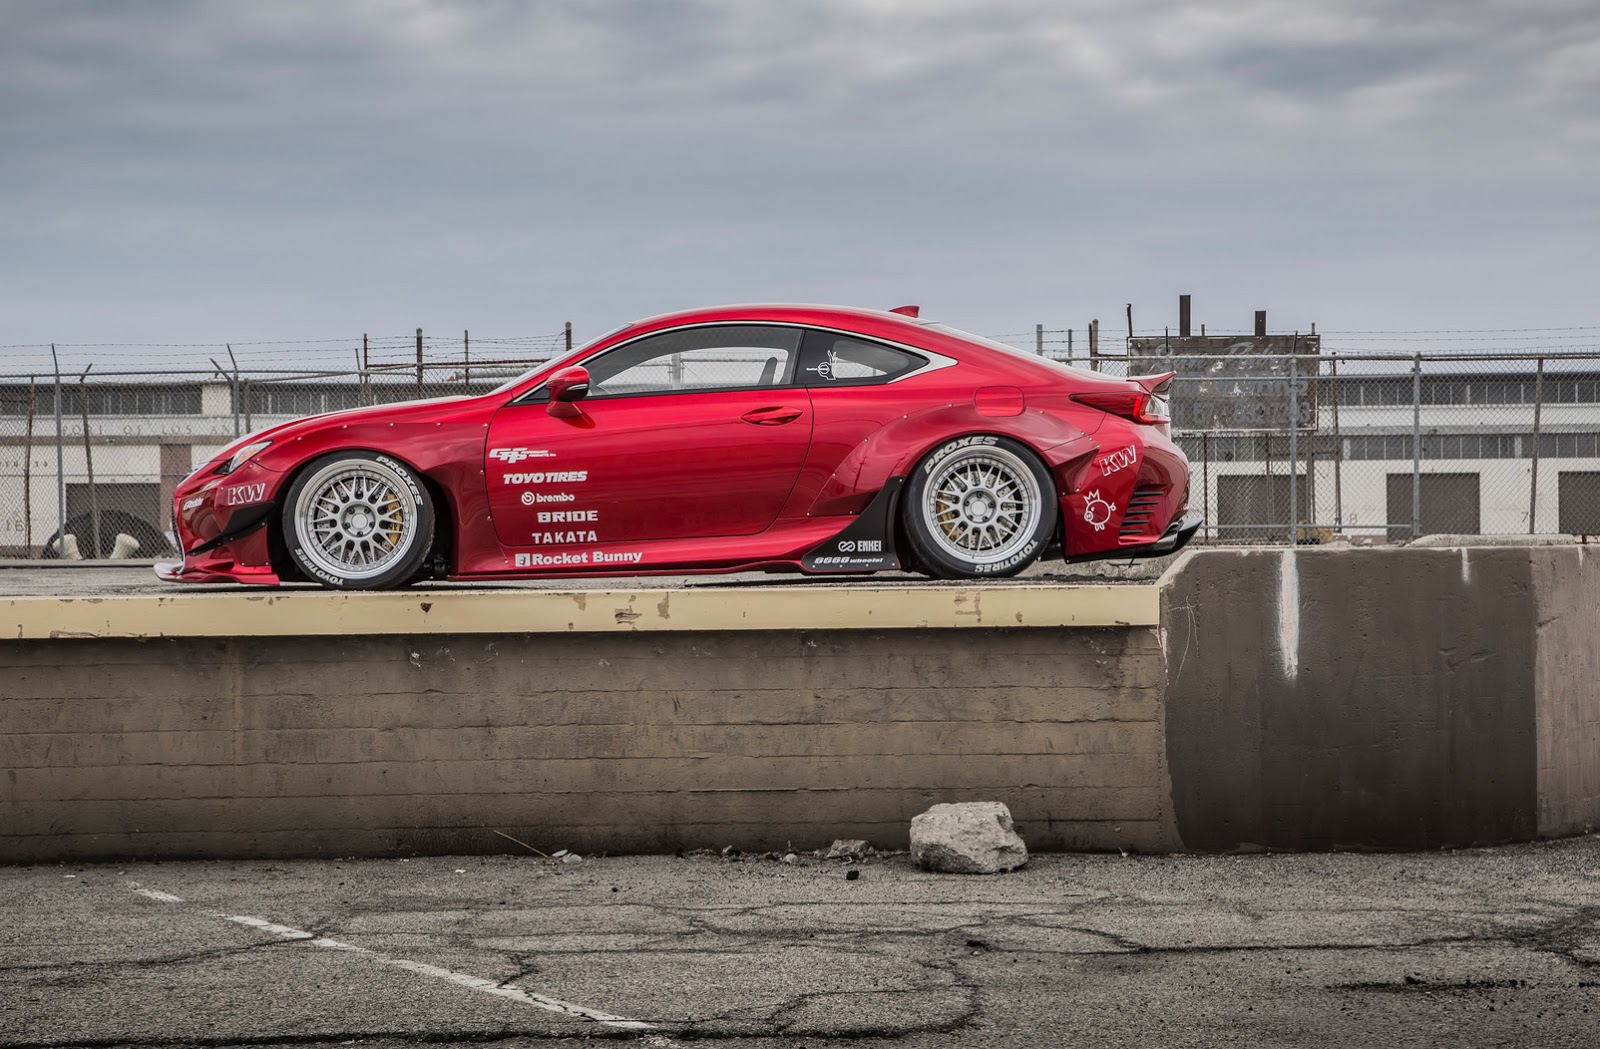 heres-your-rocket-bunny-lexus-rc-and-a-more-visceral-rc-f-photo-gallery_3